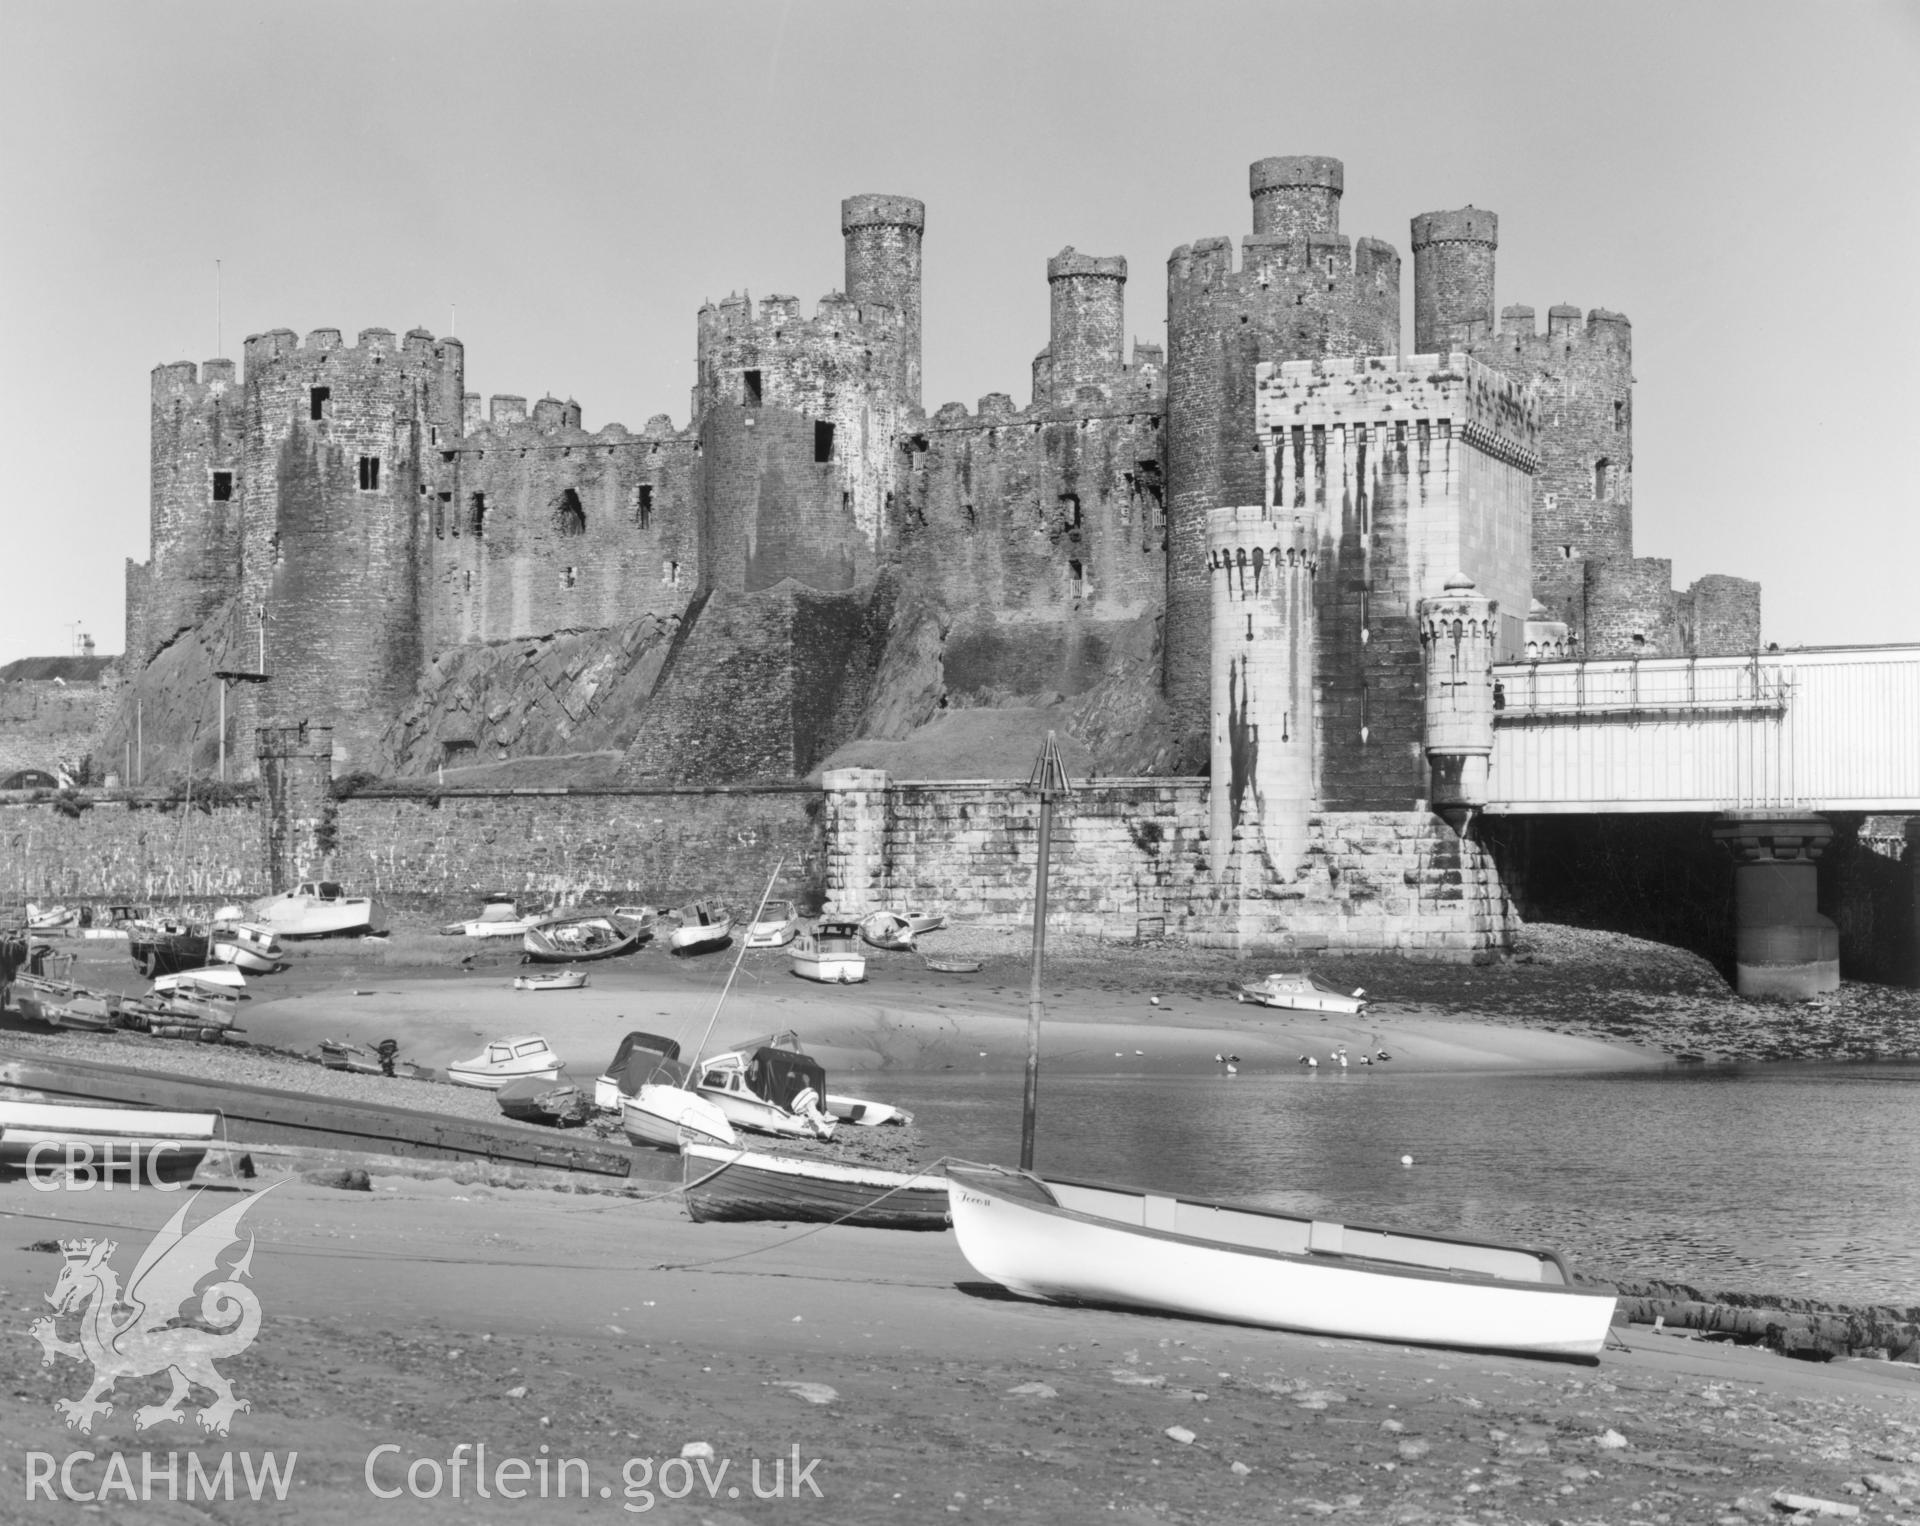 1 b/w print showing view of Conwy castle and boats, collated by the former Central Office of Information.